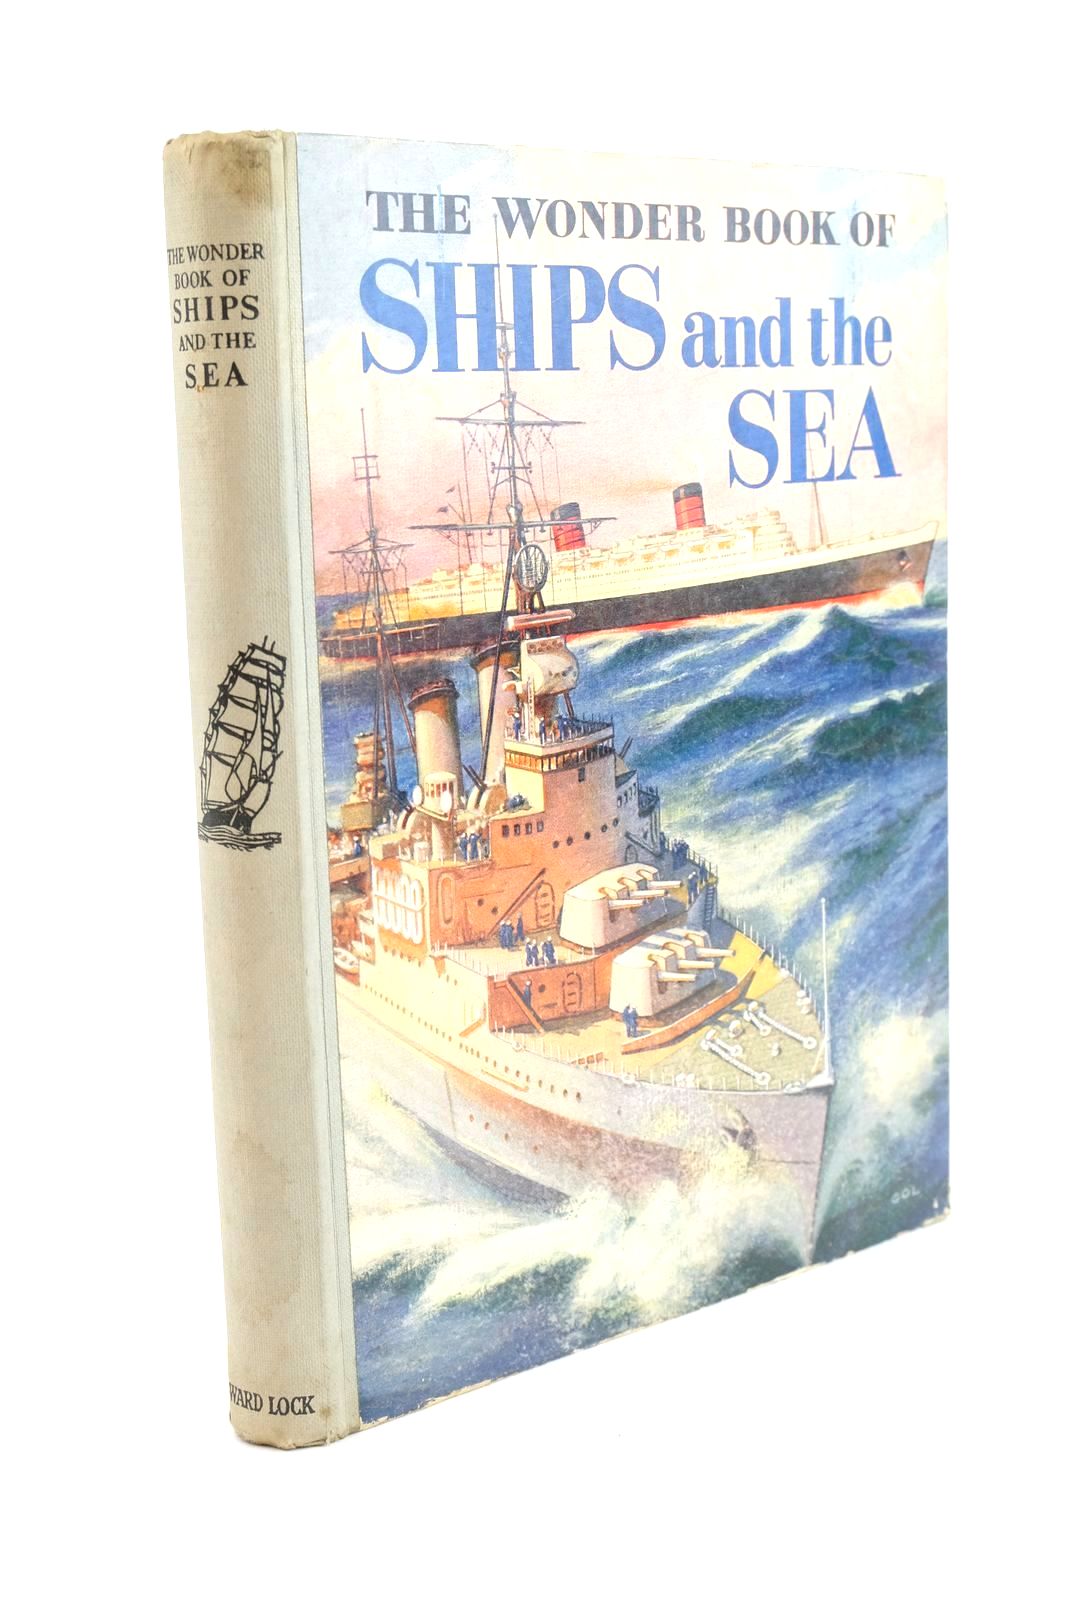 Photo of THE WONDER BOOK OF SHIPS AND THE SEA written by Watson, A.O.
Palmer, J.M.
Shaw, David
Phillips-Birt, Douglas
Pine, L.G.
Ash, C.E.
Shepherd, Walter
Pringle, Patrick
Andrewes, Edward published by Ward, Lock & Co. Ltd. (STOCK CODE: 1323839)  for sale by Stella & Rose's Books